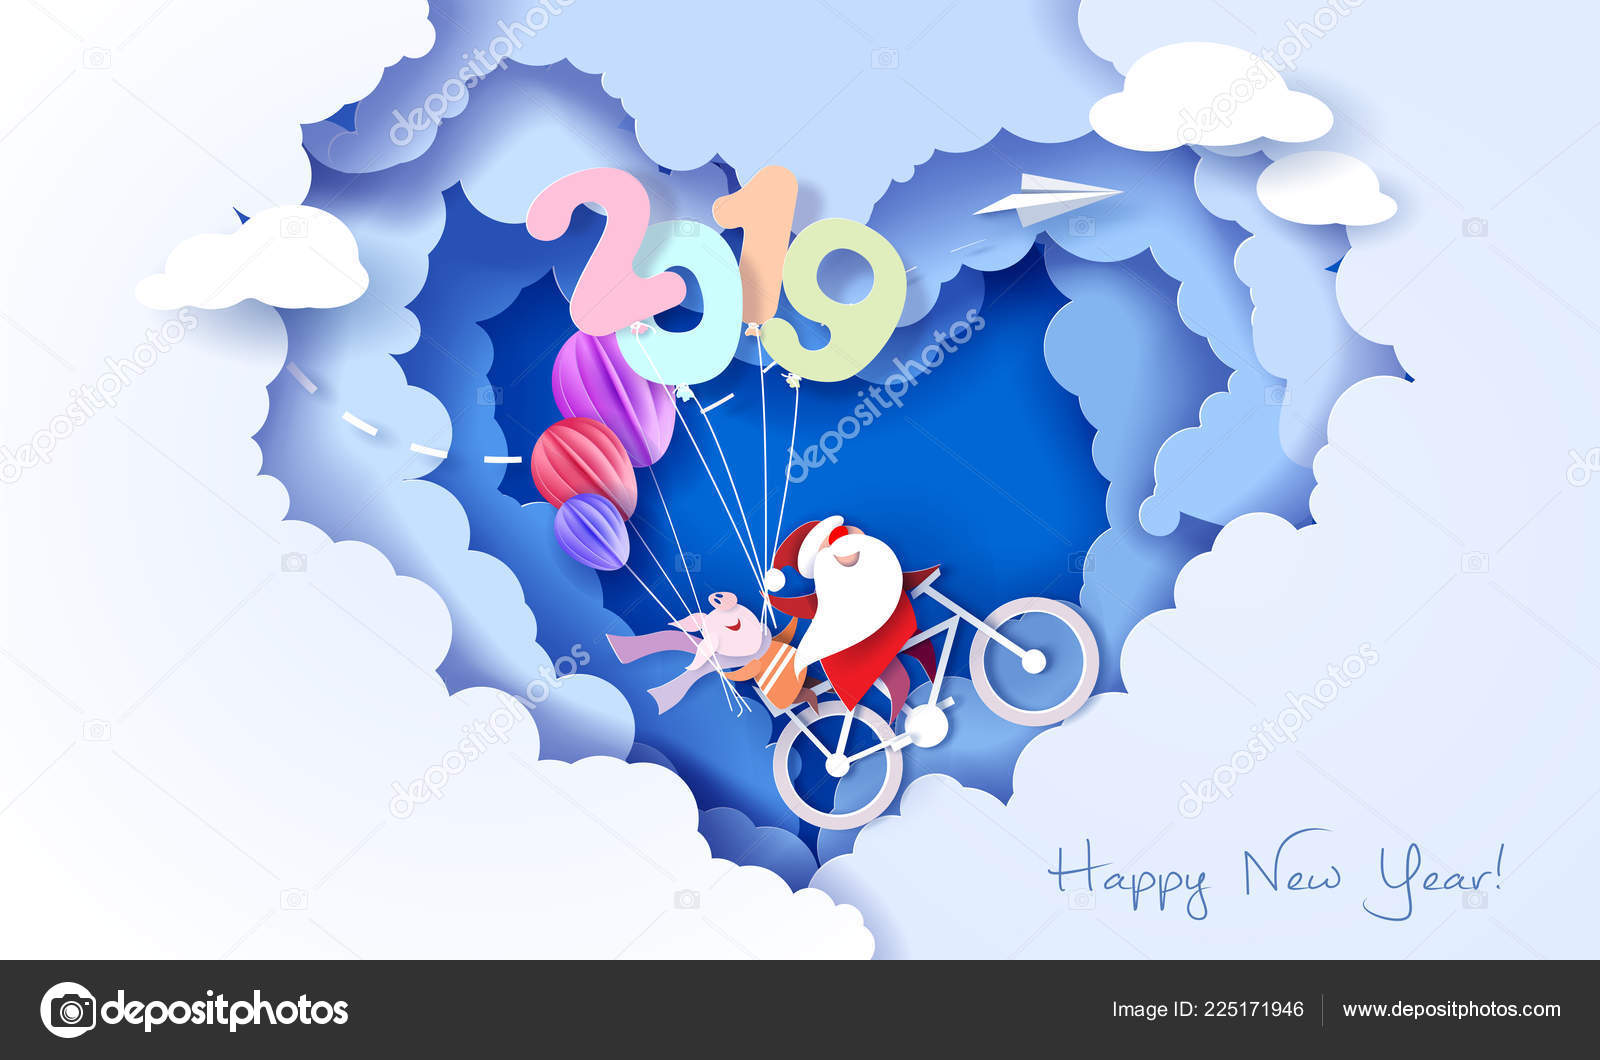 19 Happy New Year Design Card With Santa And Elf Vector Image By C Valenty Vector Stock